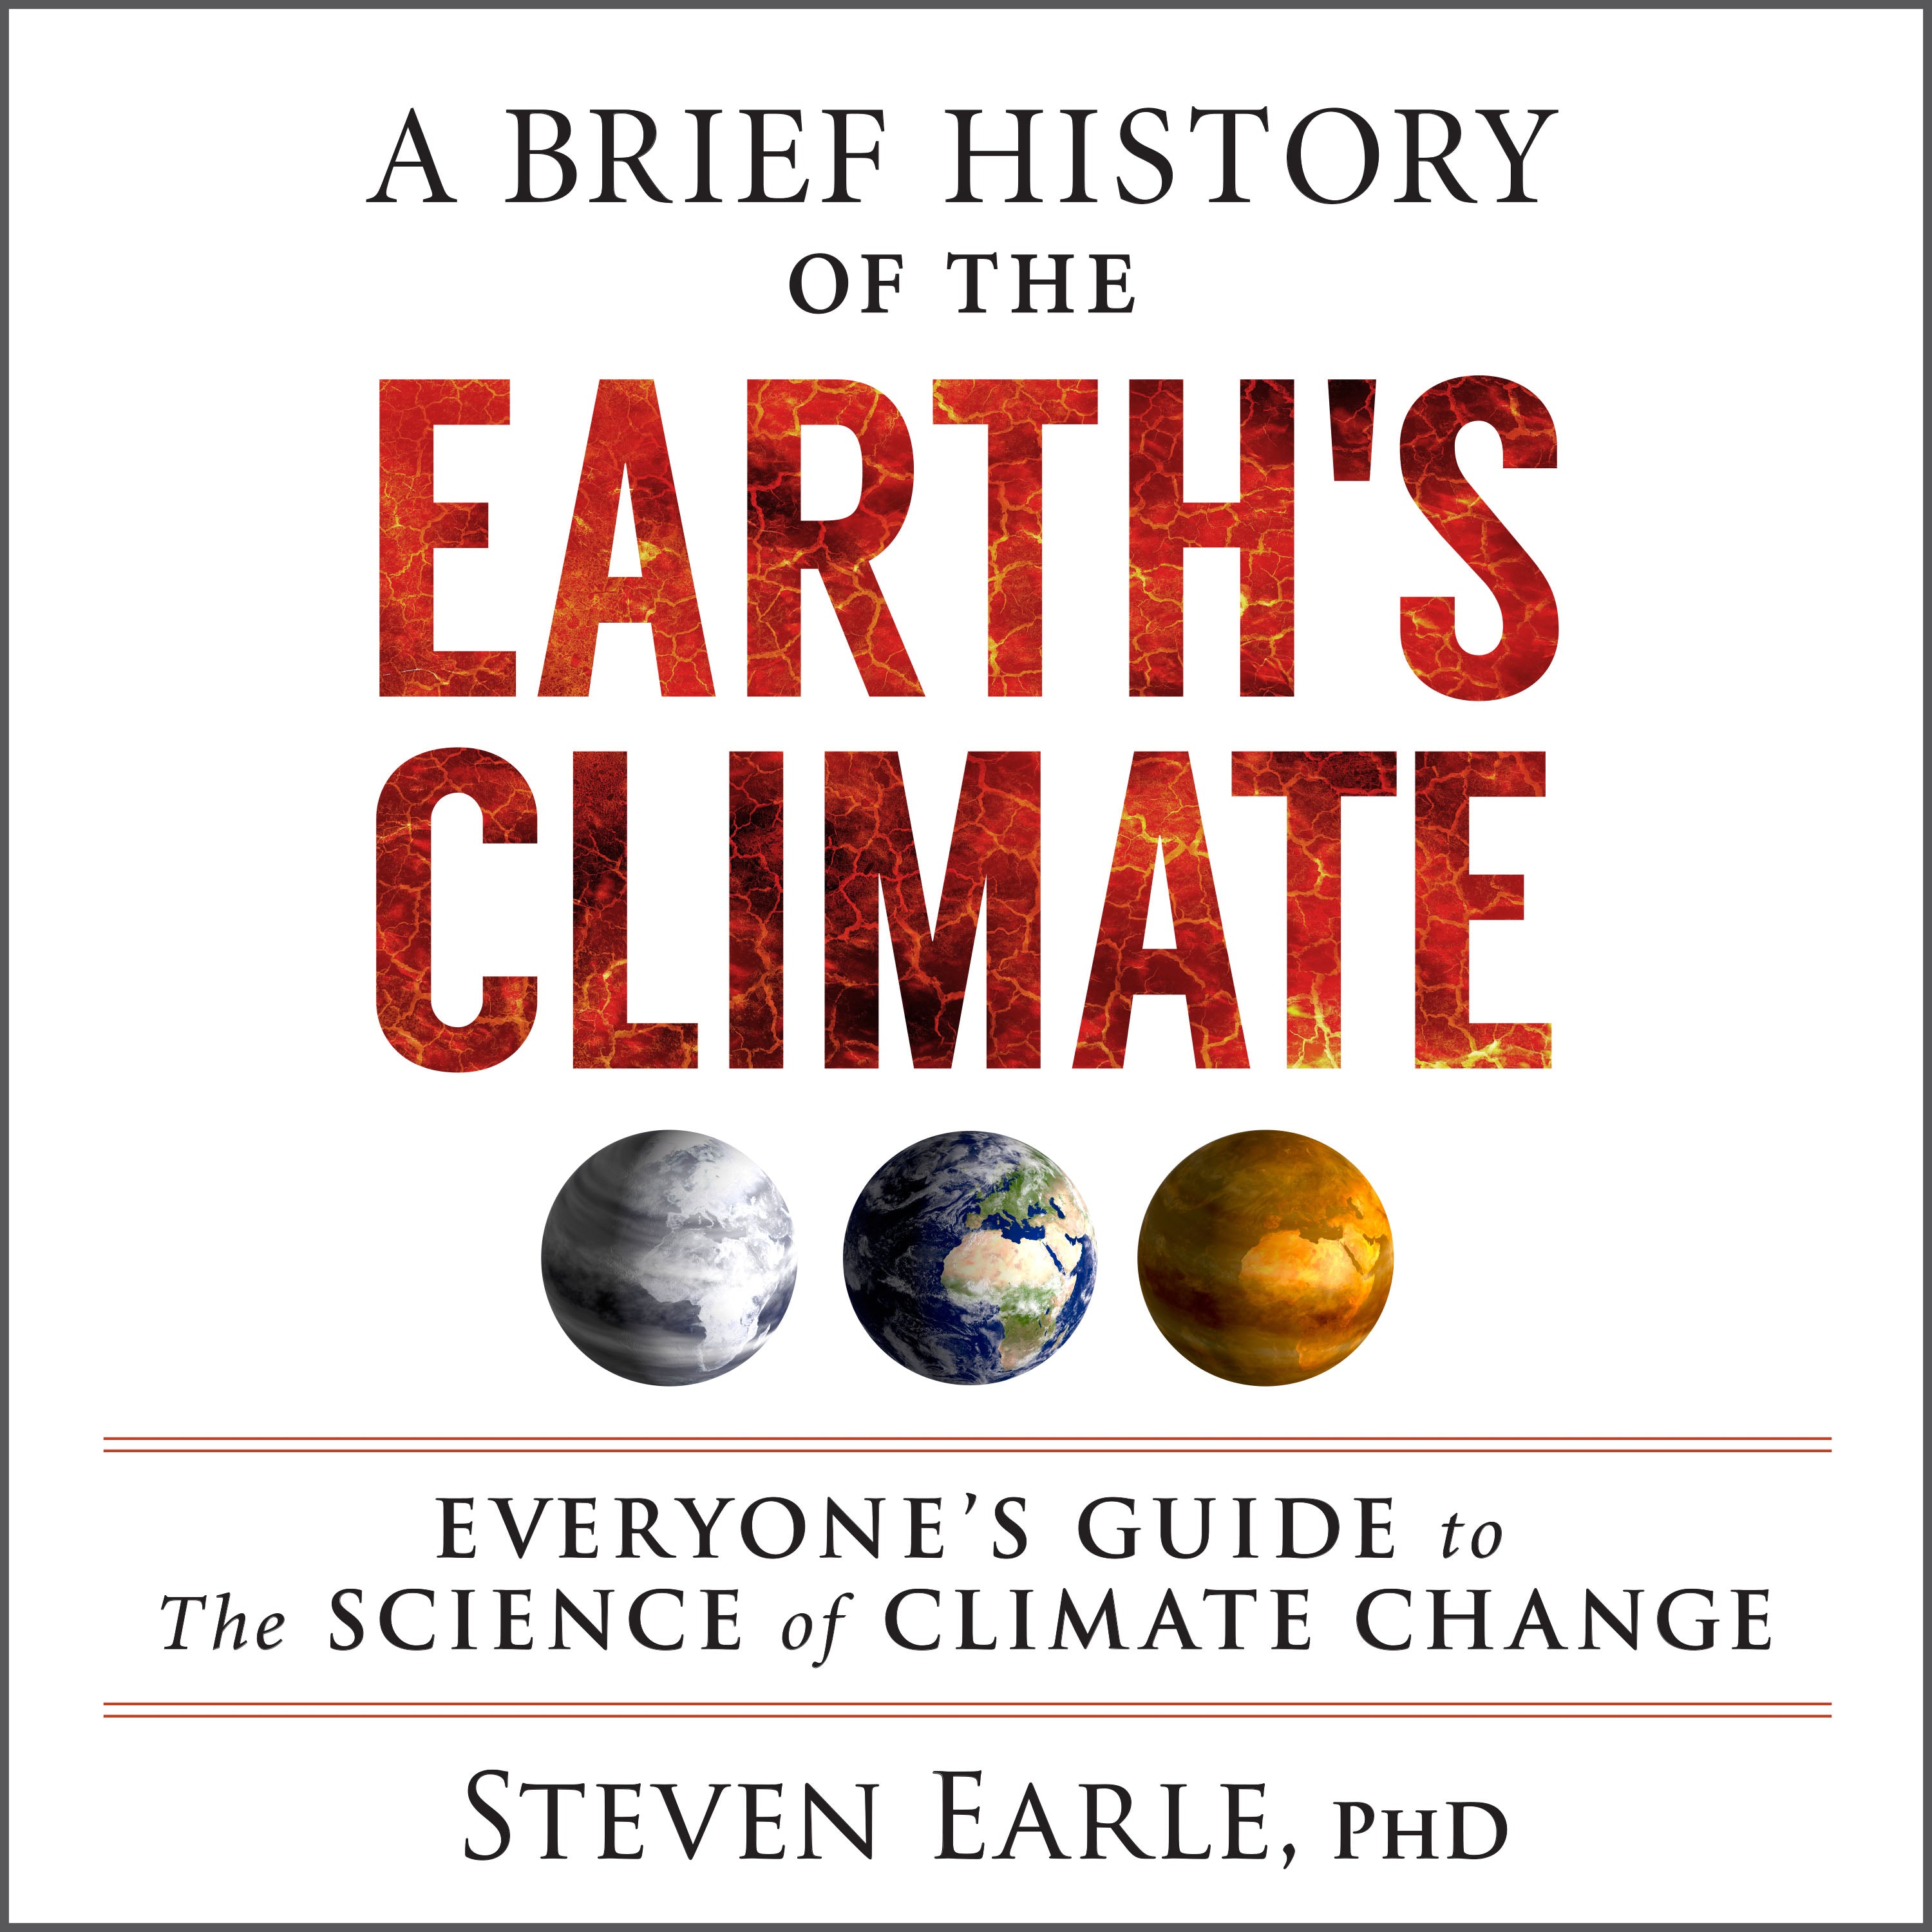 A Brief History of the Earth's Climate book cover